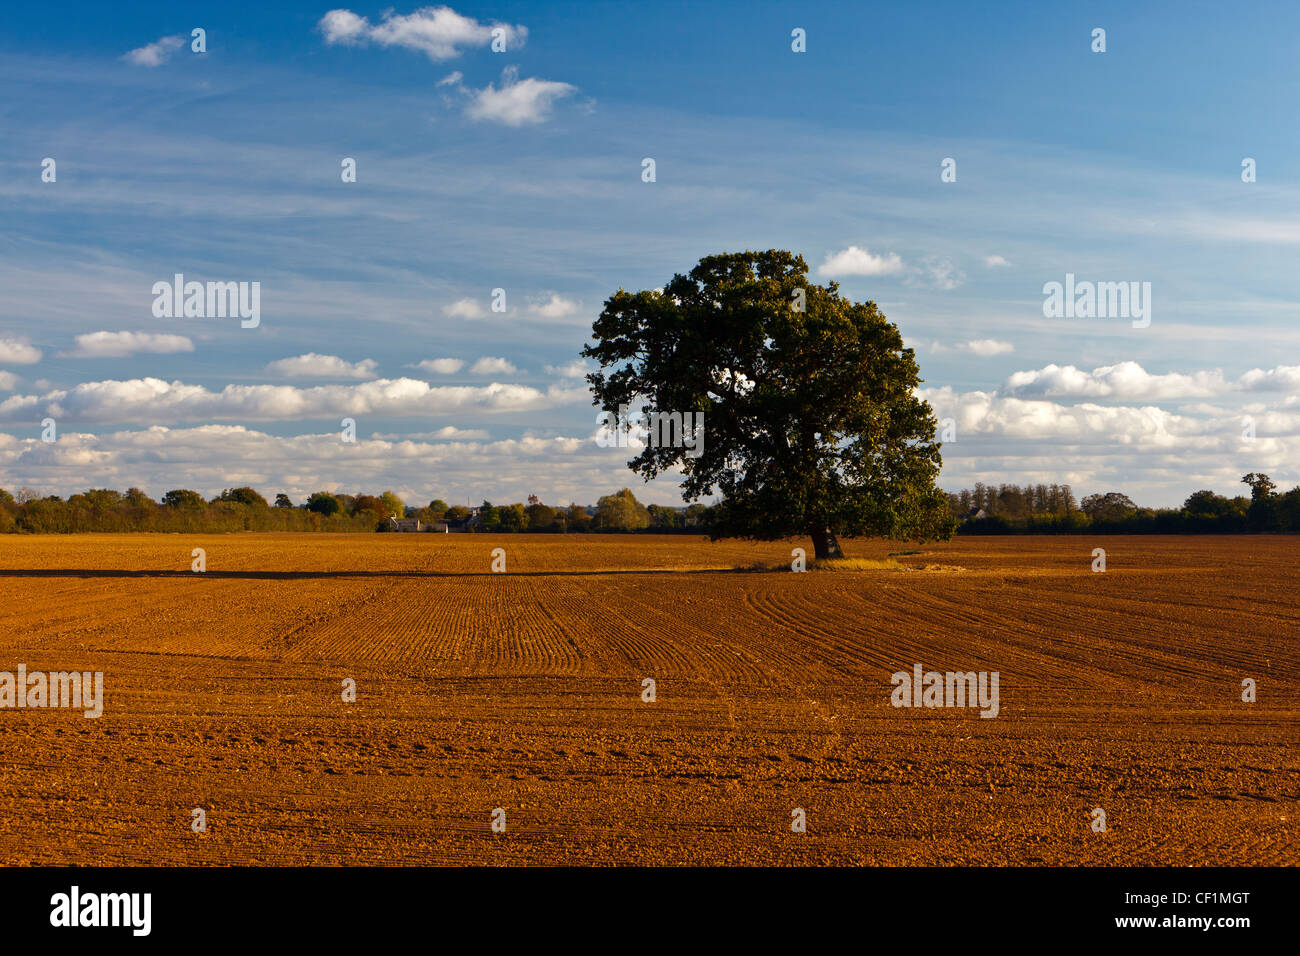 Single tree in a recently ploughed field. Stock Photo